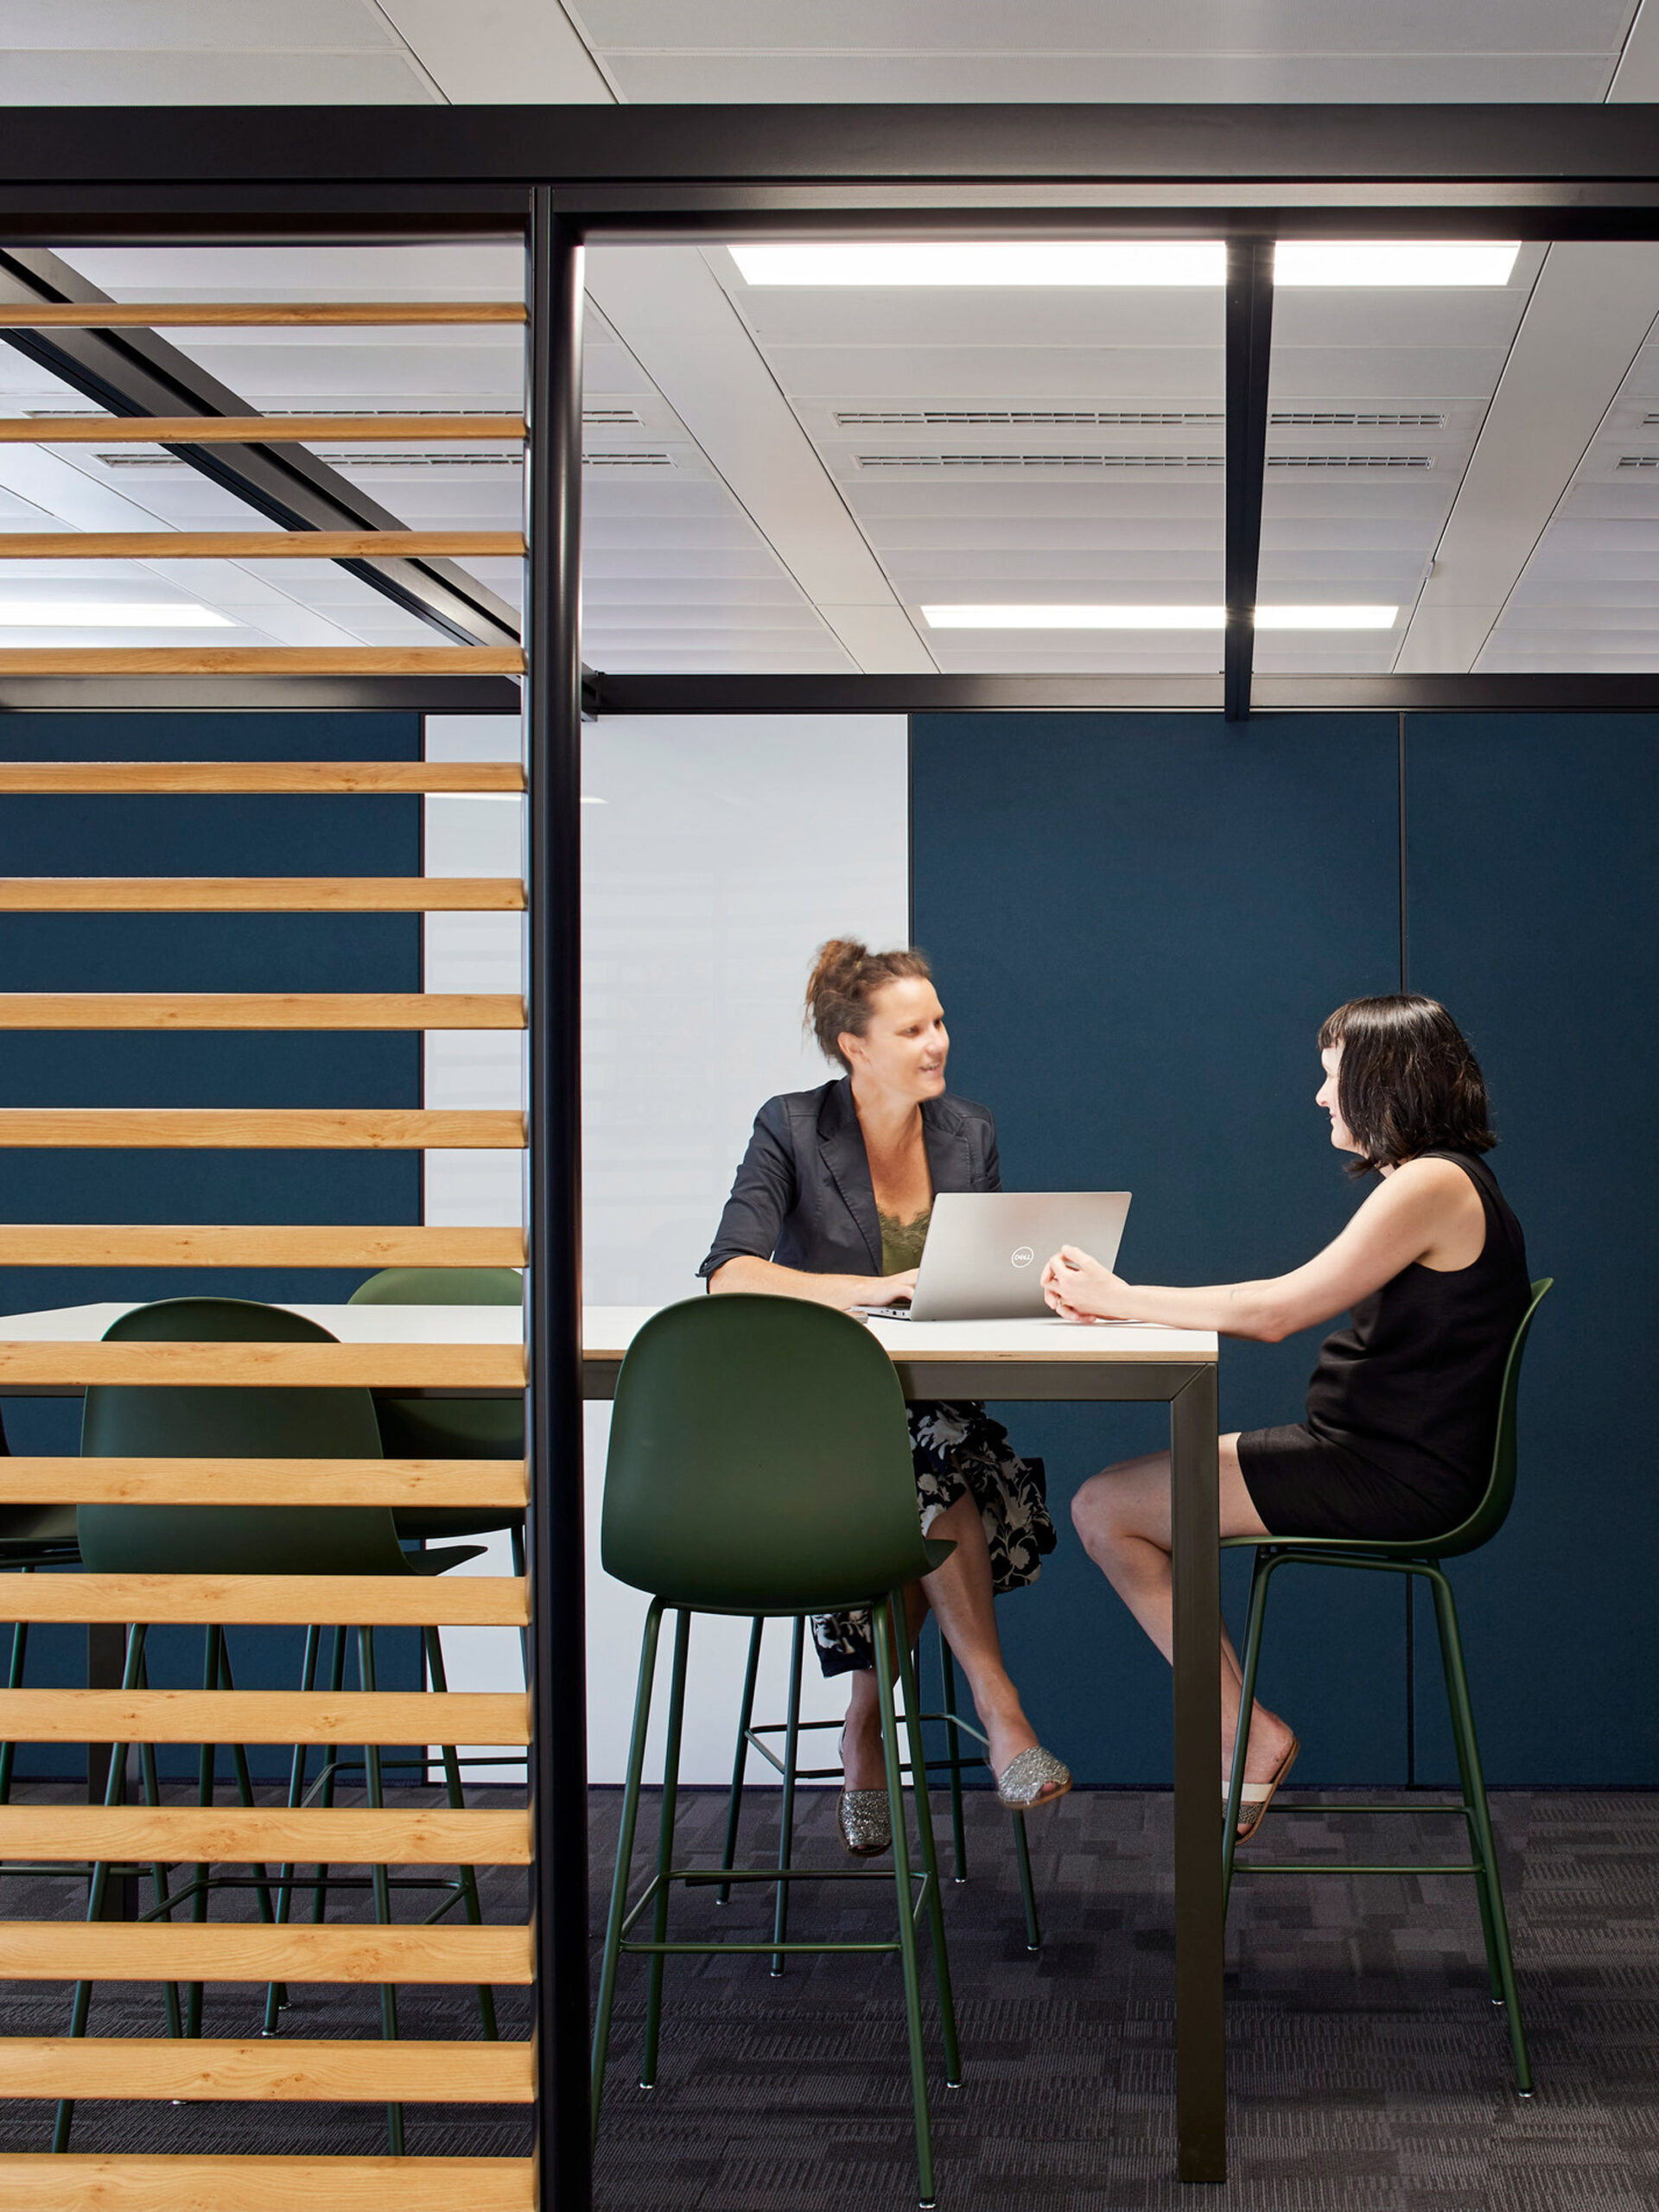 Two professionals converse in a modern office space with glass partitions, highlighting the use of natural light and open design for collaborative workspaces.